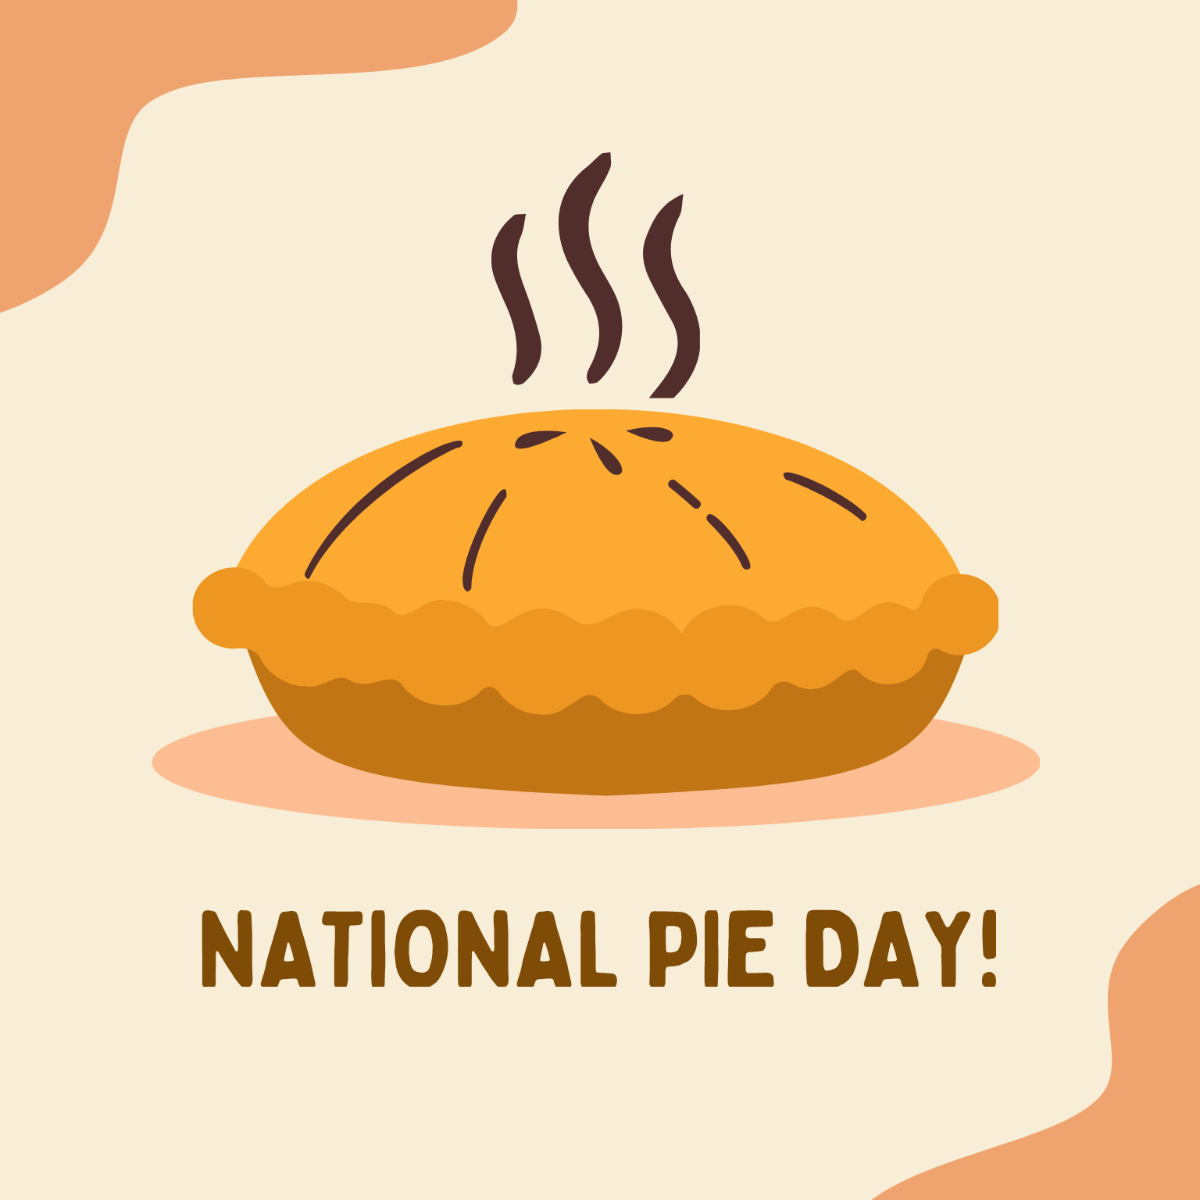 National Pie Day Illustration Template